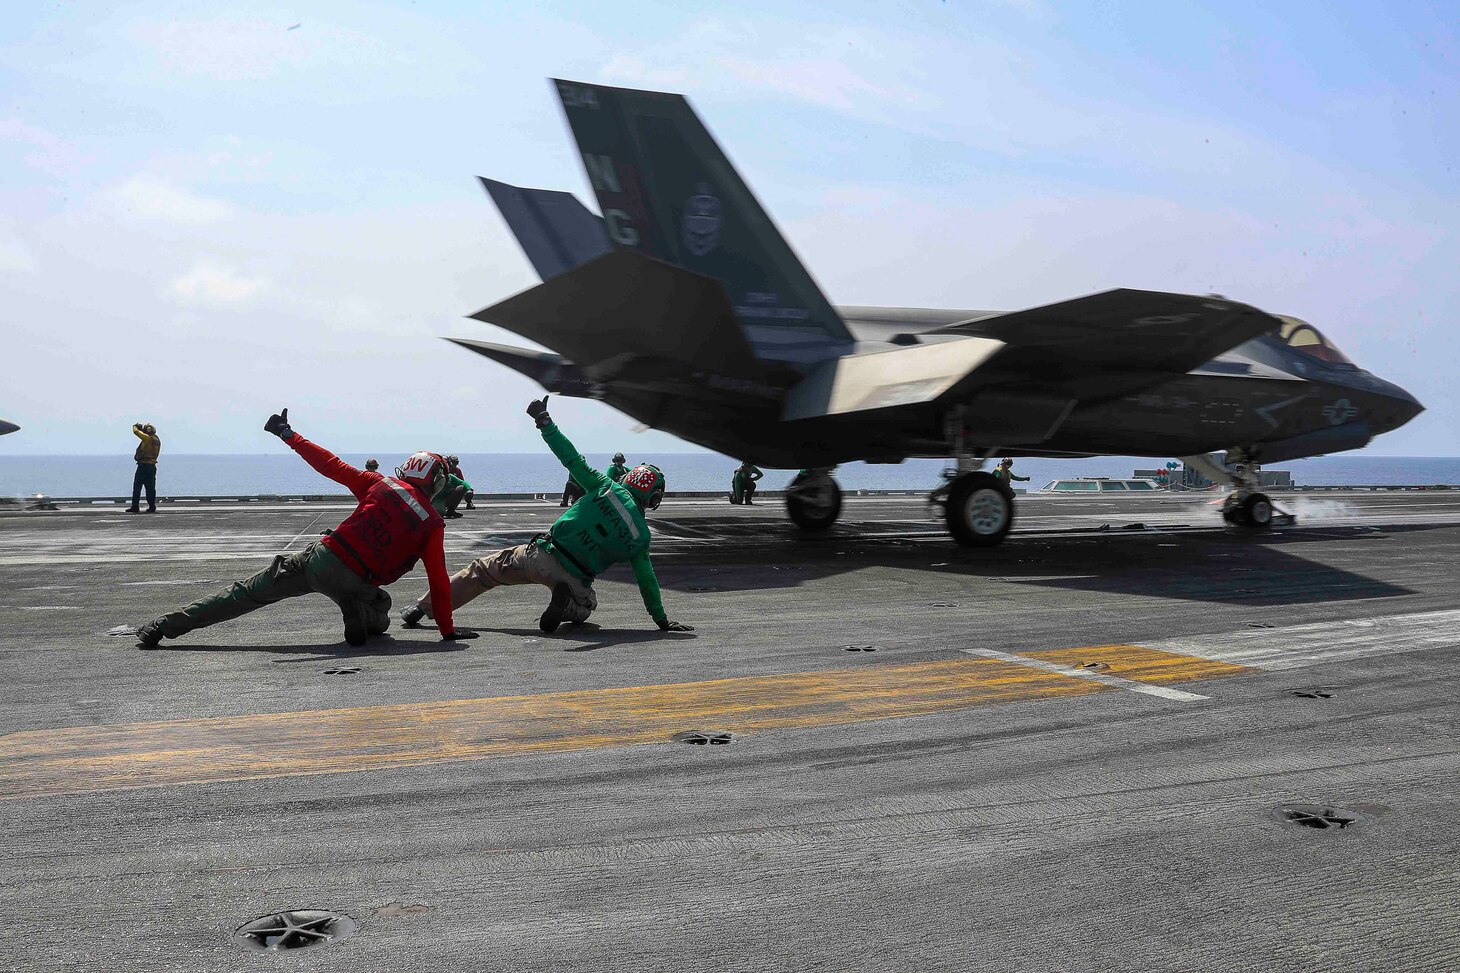 PHILIPPINE SEA (March 15, 2022) Sailors signal an F-35C Lightning II, assigned to the "Black Knights" of Marine Fighter Attack Squadron (VMFA) 314, as it launches from the flight deck of the Nimitz-class aircraft carrier USS Abraham Lincoln (CVN 72). Abraham Lincoln Strike Group is on a scheduled deployment in the U.S. 7th Fleet area of operations to enhance interoperability through alliances and partnerships while serving as a ready-response force in support of a free and open Indo-Pacific region. (U.S. Navy photo by Mass Communication Specialist 3rd Class Javier Reyes)